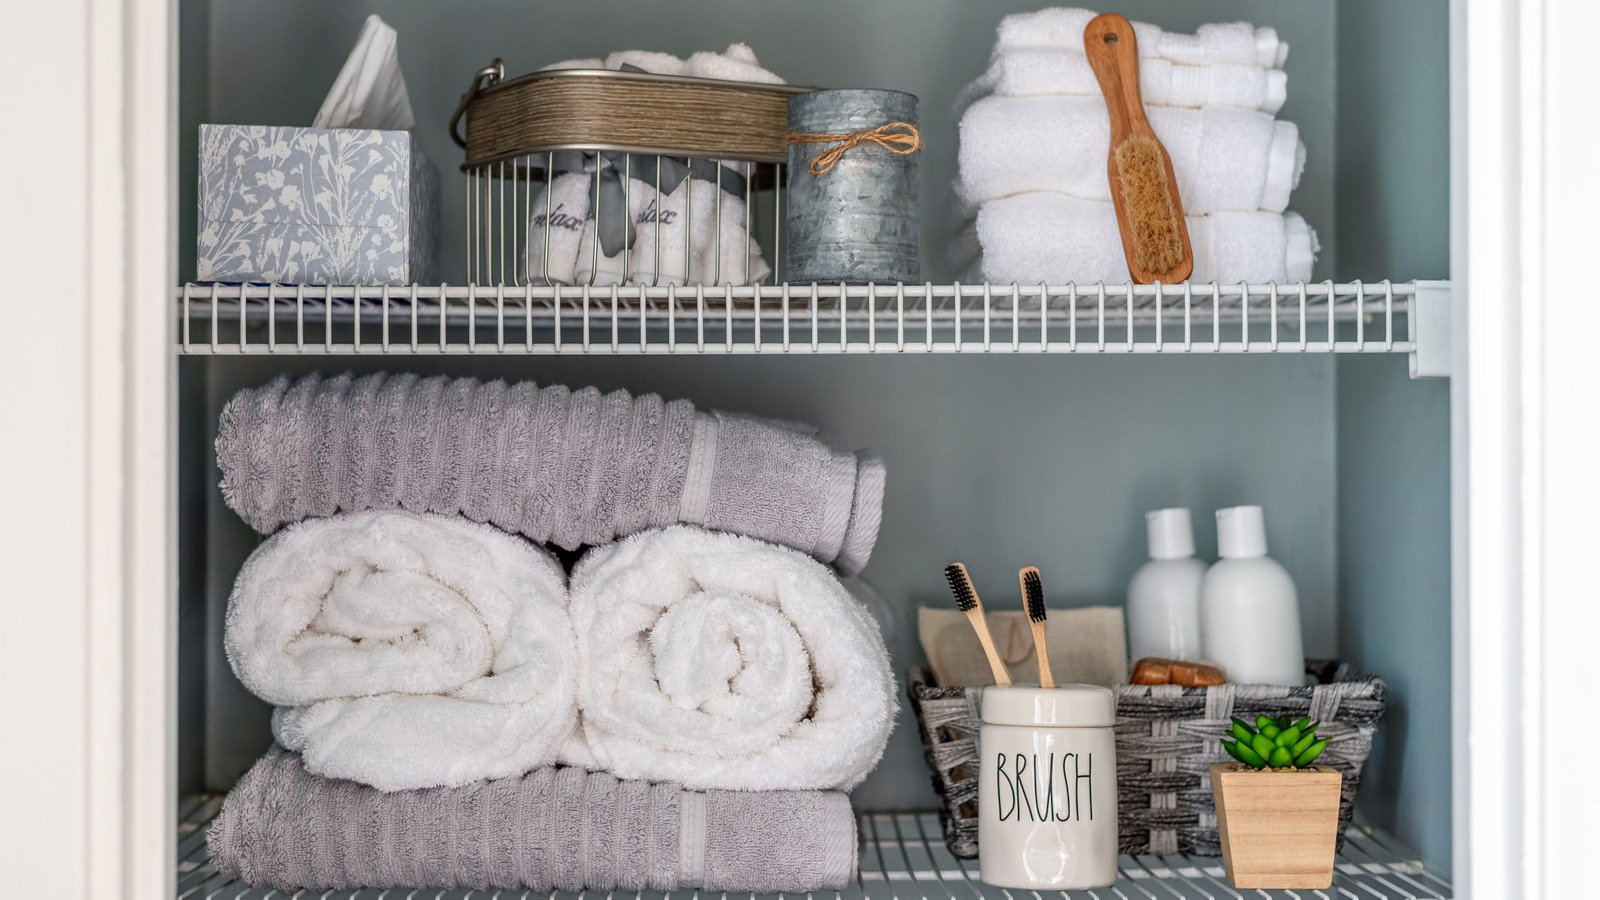 The Easiest Way To Make Your Home More Organized